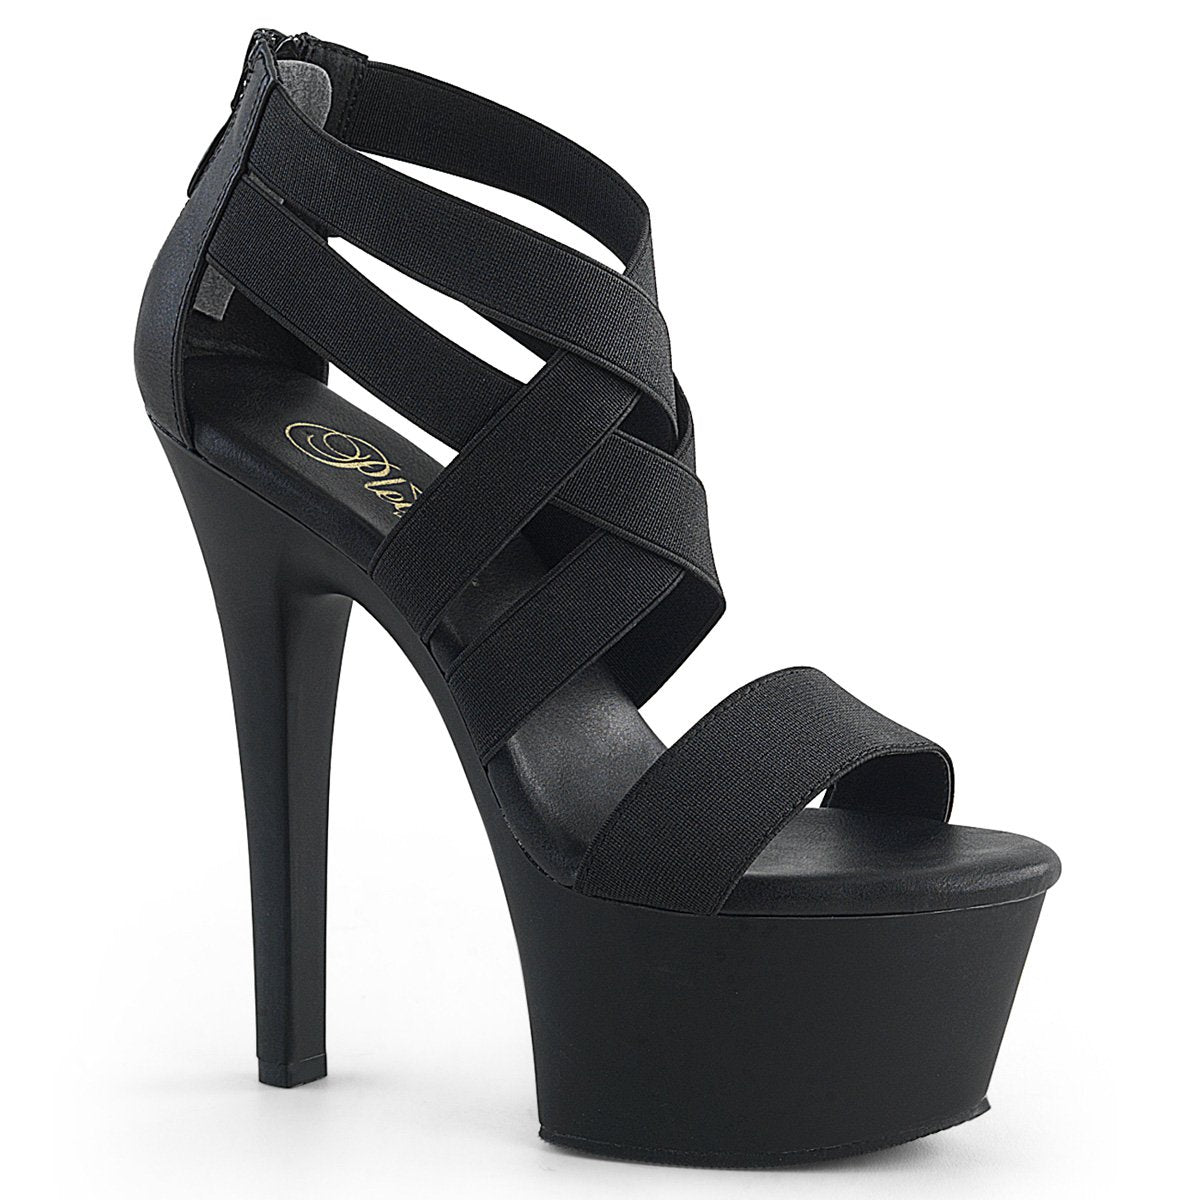 Pleaser Aspire-669 Platforms | Buy Sexy Shoes at Shoefreaks.ca